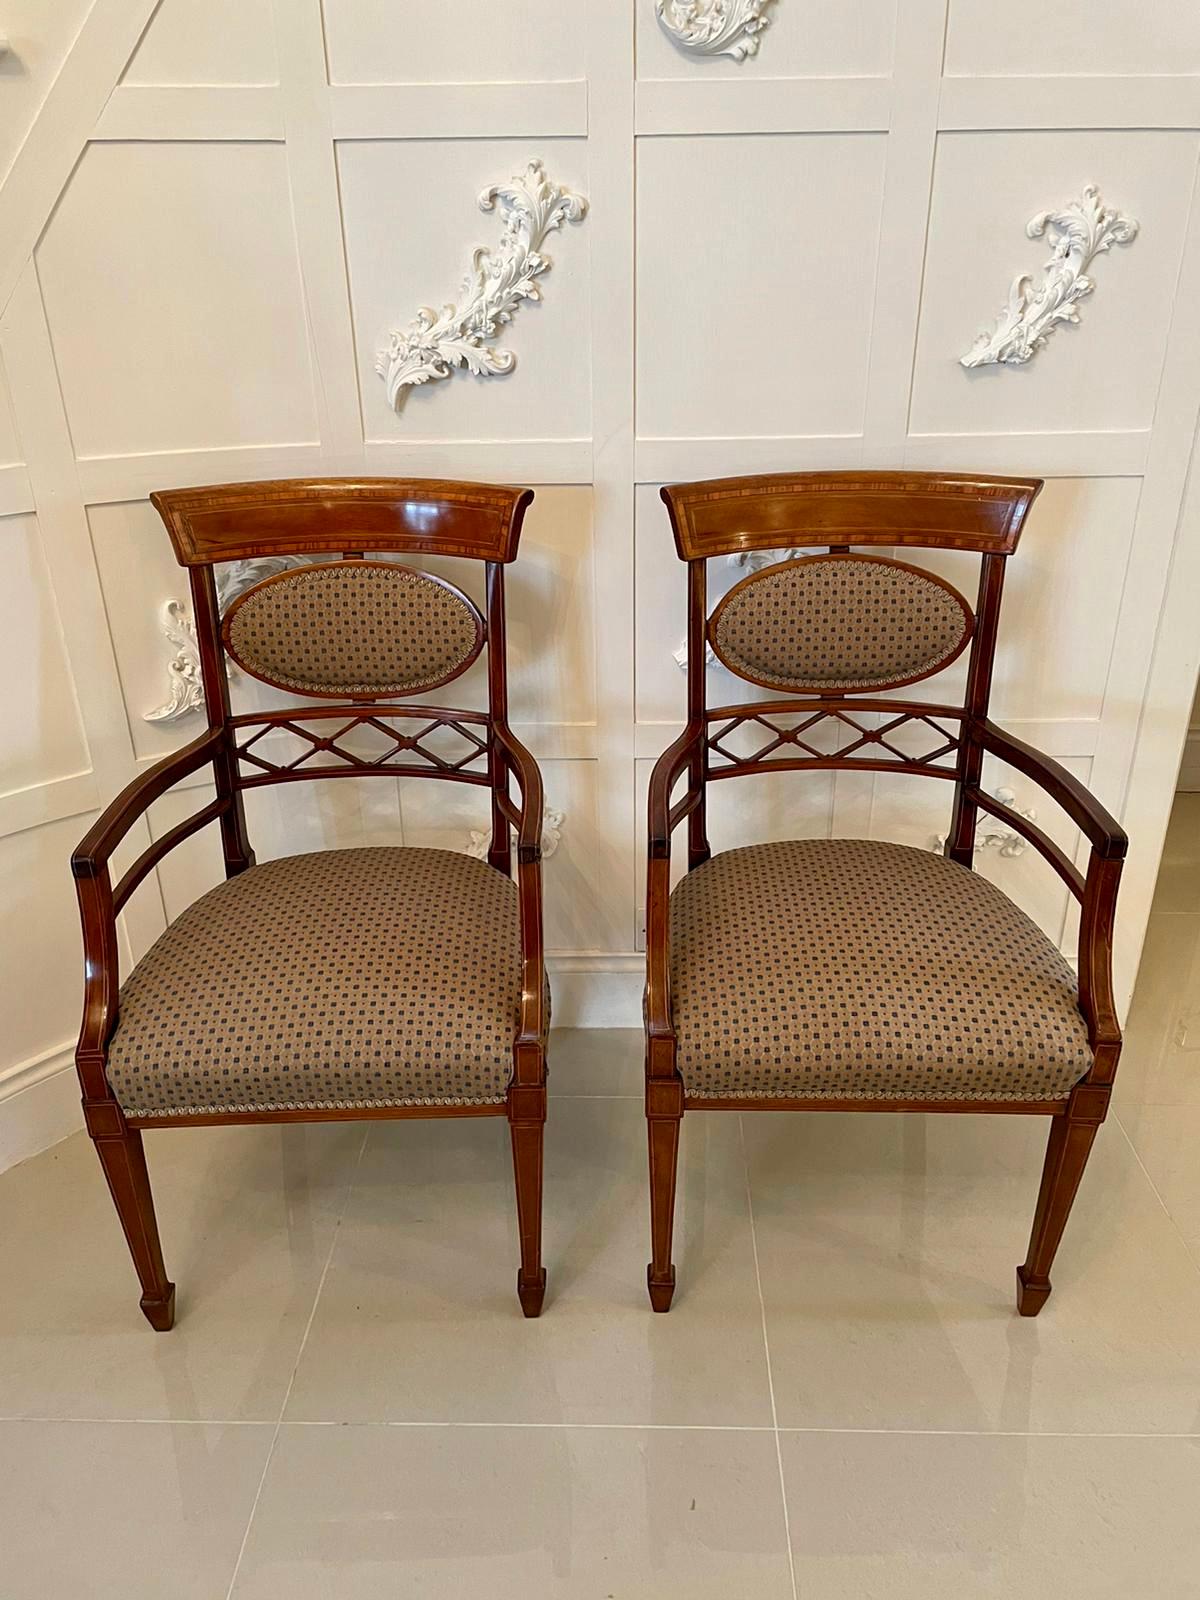 Fine quality elegant pair of 19th century Victorian inlaid mahogany desk chairs having elegant shaped open arms and attractive shaped inlaid mahogany top rails and unusual but pleasing oval padded backs above pierced shaped inlaid mahogany splats.